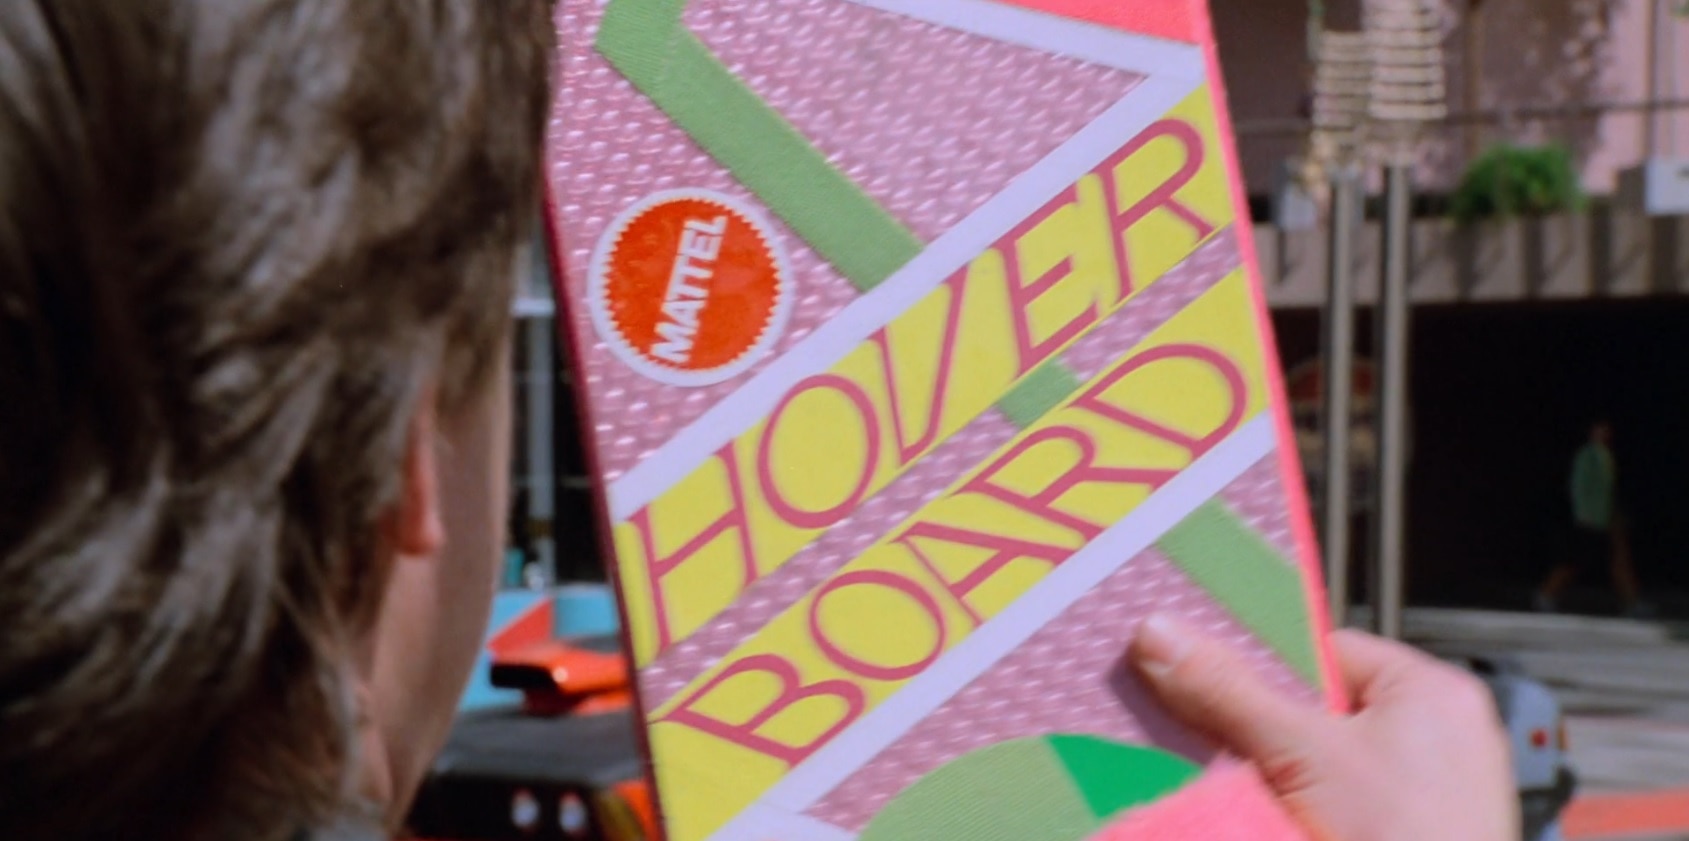 C'mon, Marty! So how close are we to having real-life hoverboards like in Back to the Future Part II?